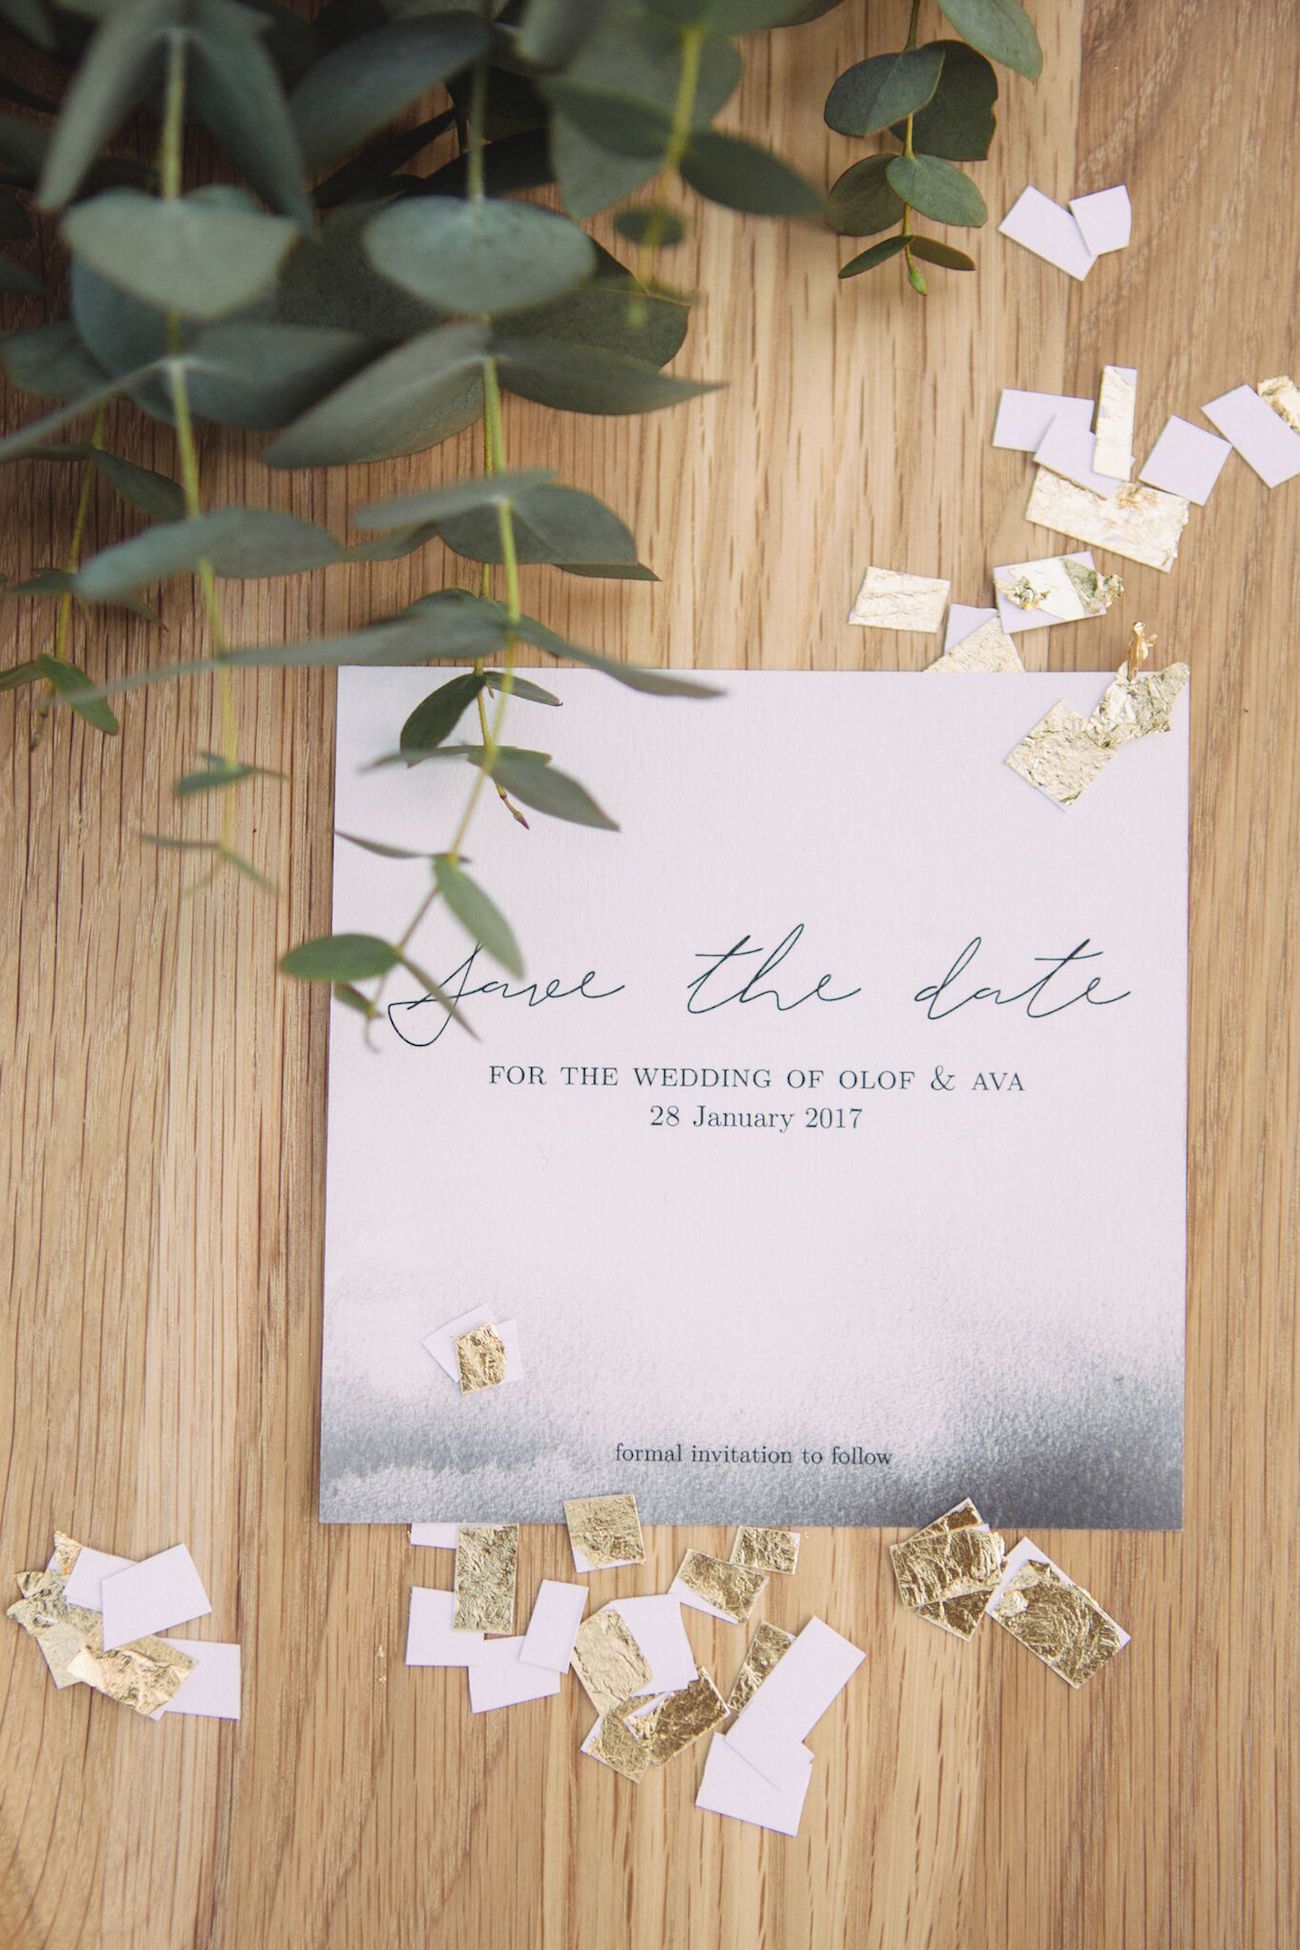 Grey Watercolor Ombre Save the Date | Credit: Dust & Dreams Photography